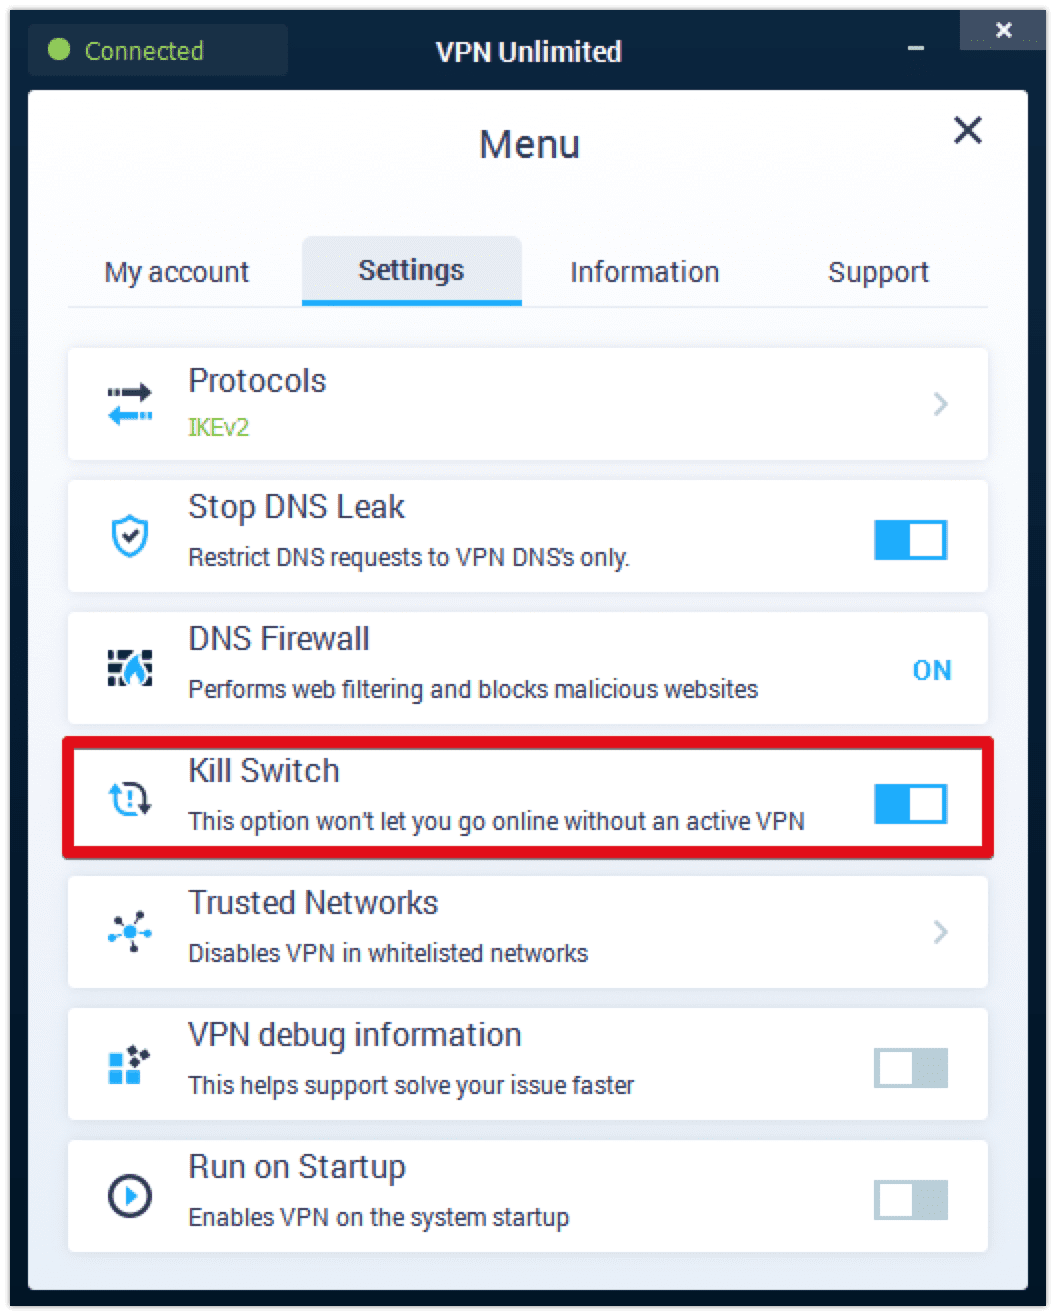 The Kill Switch feature in VPN Unlimited on Windows